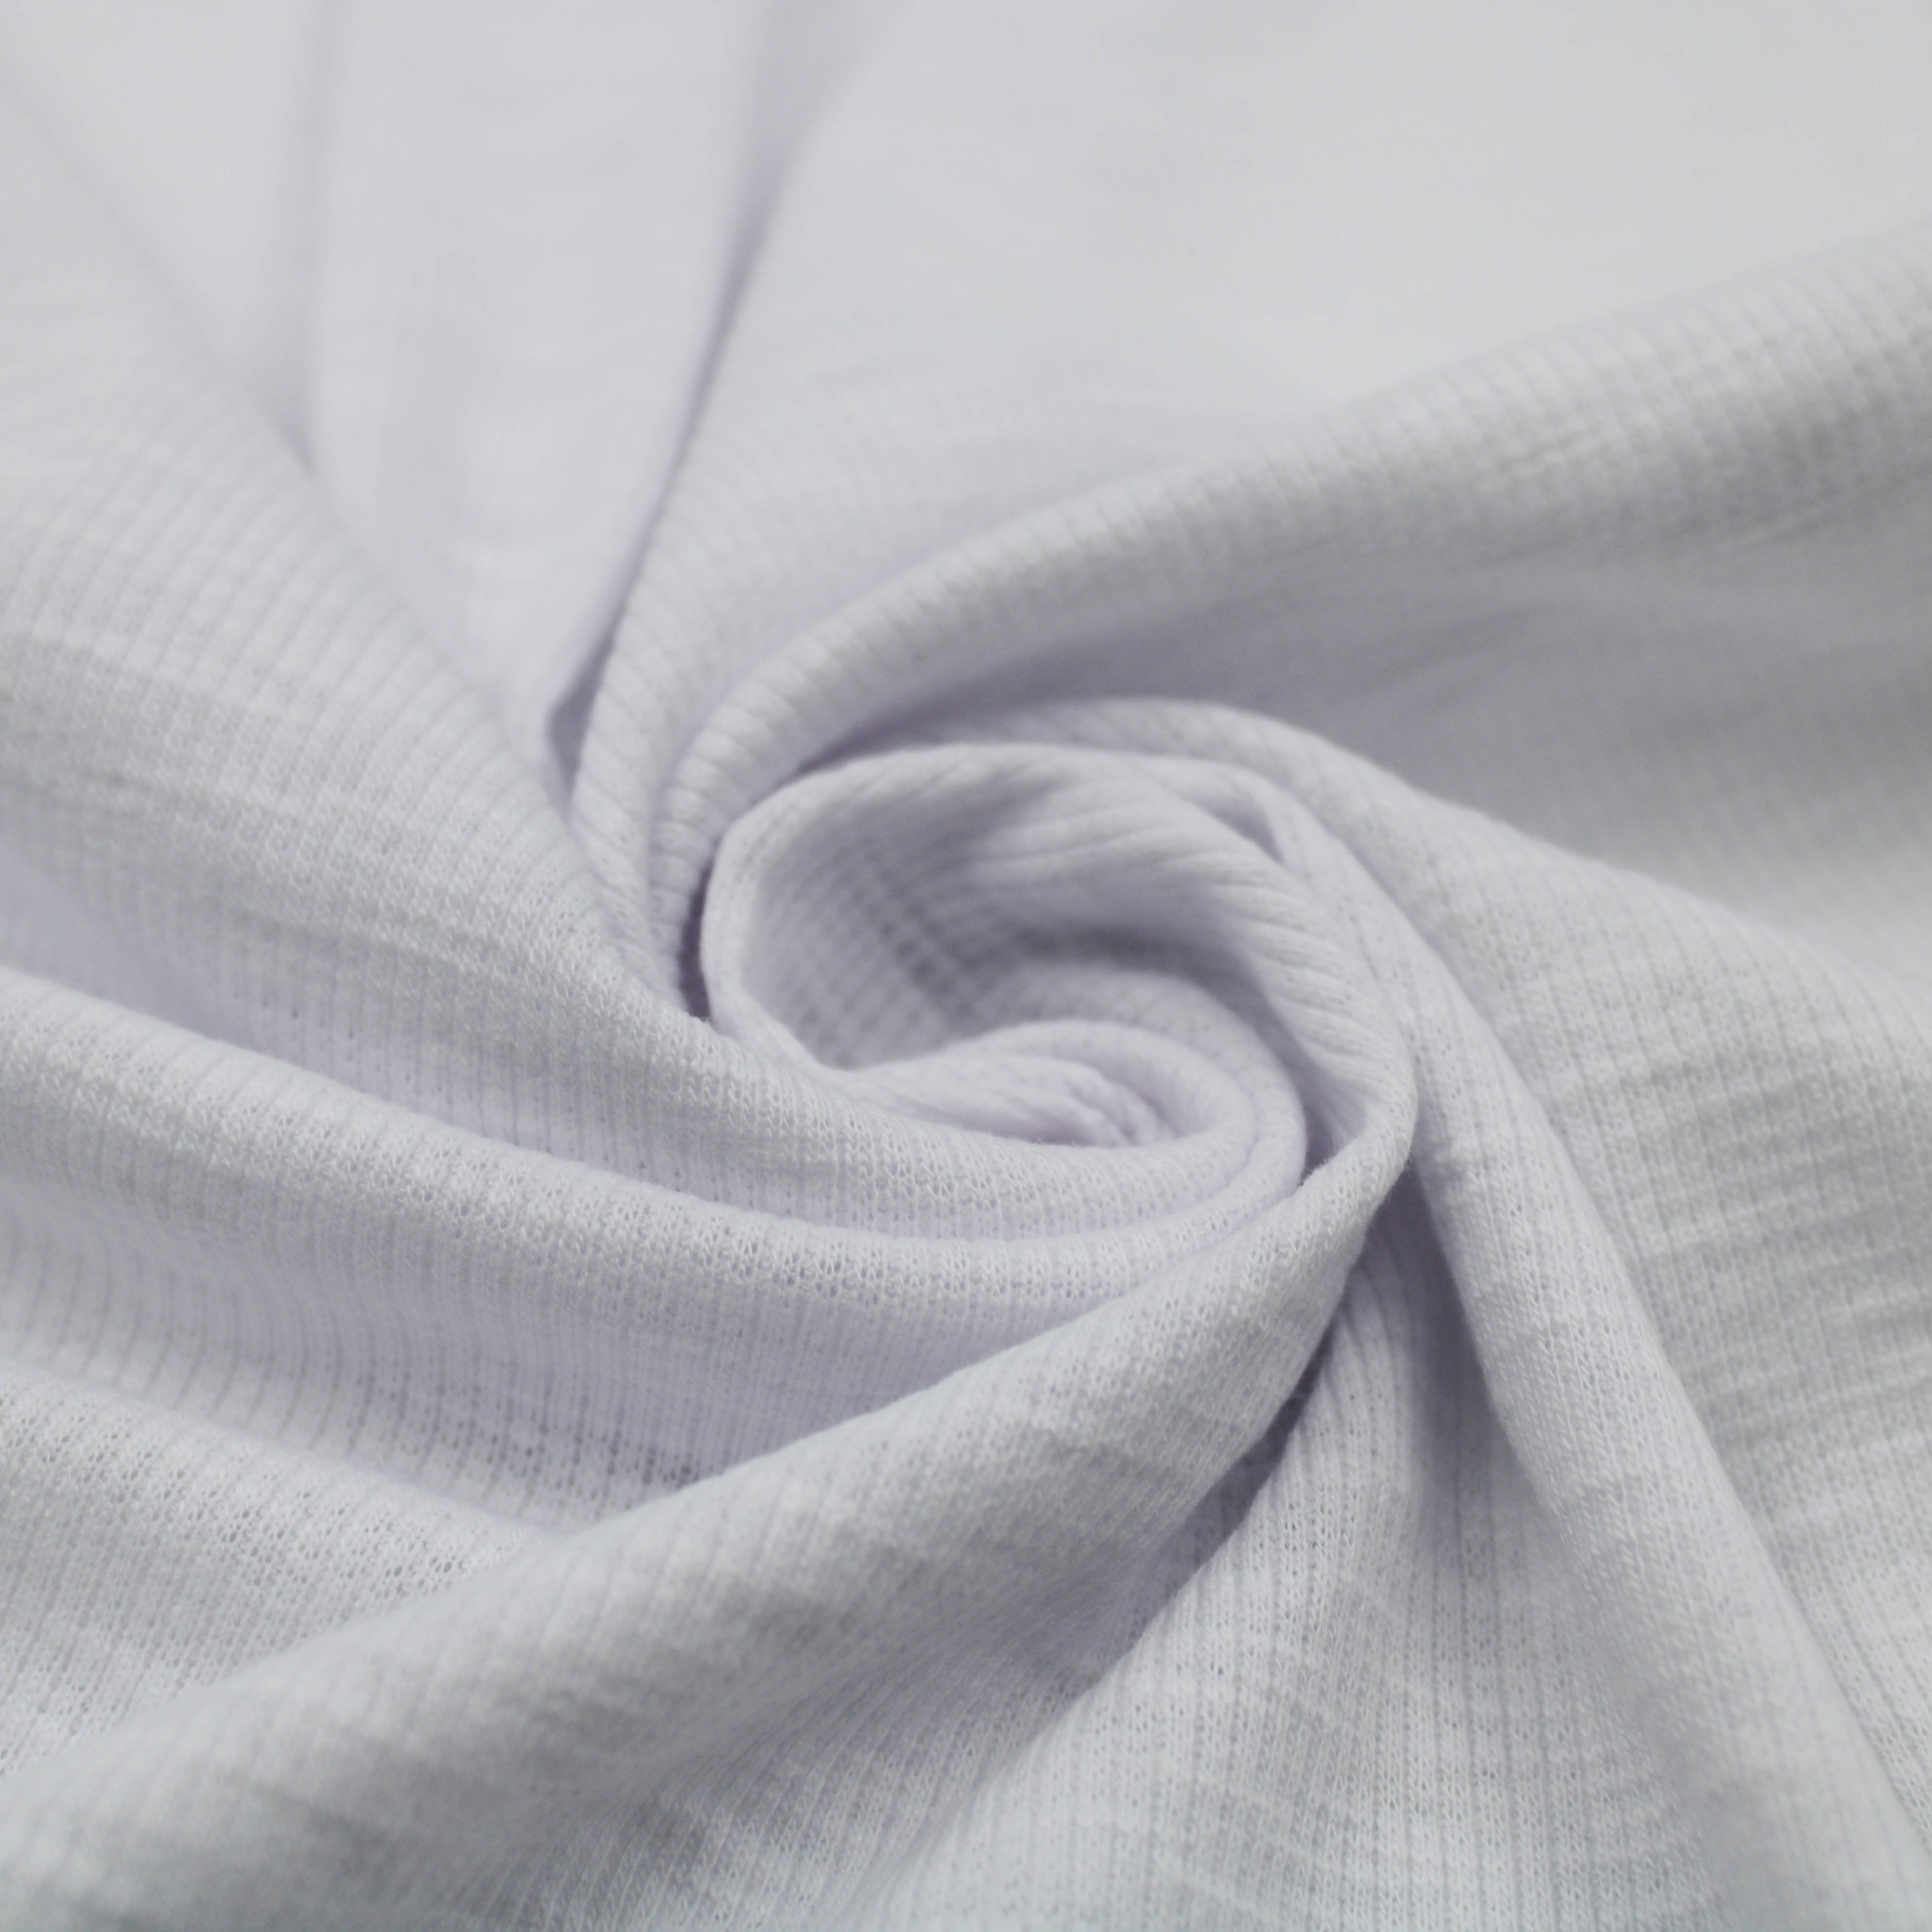 White Poly Cotton Spandex 2x1 Rib Knit Fabric, DIY Projects by the Yard ...